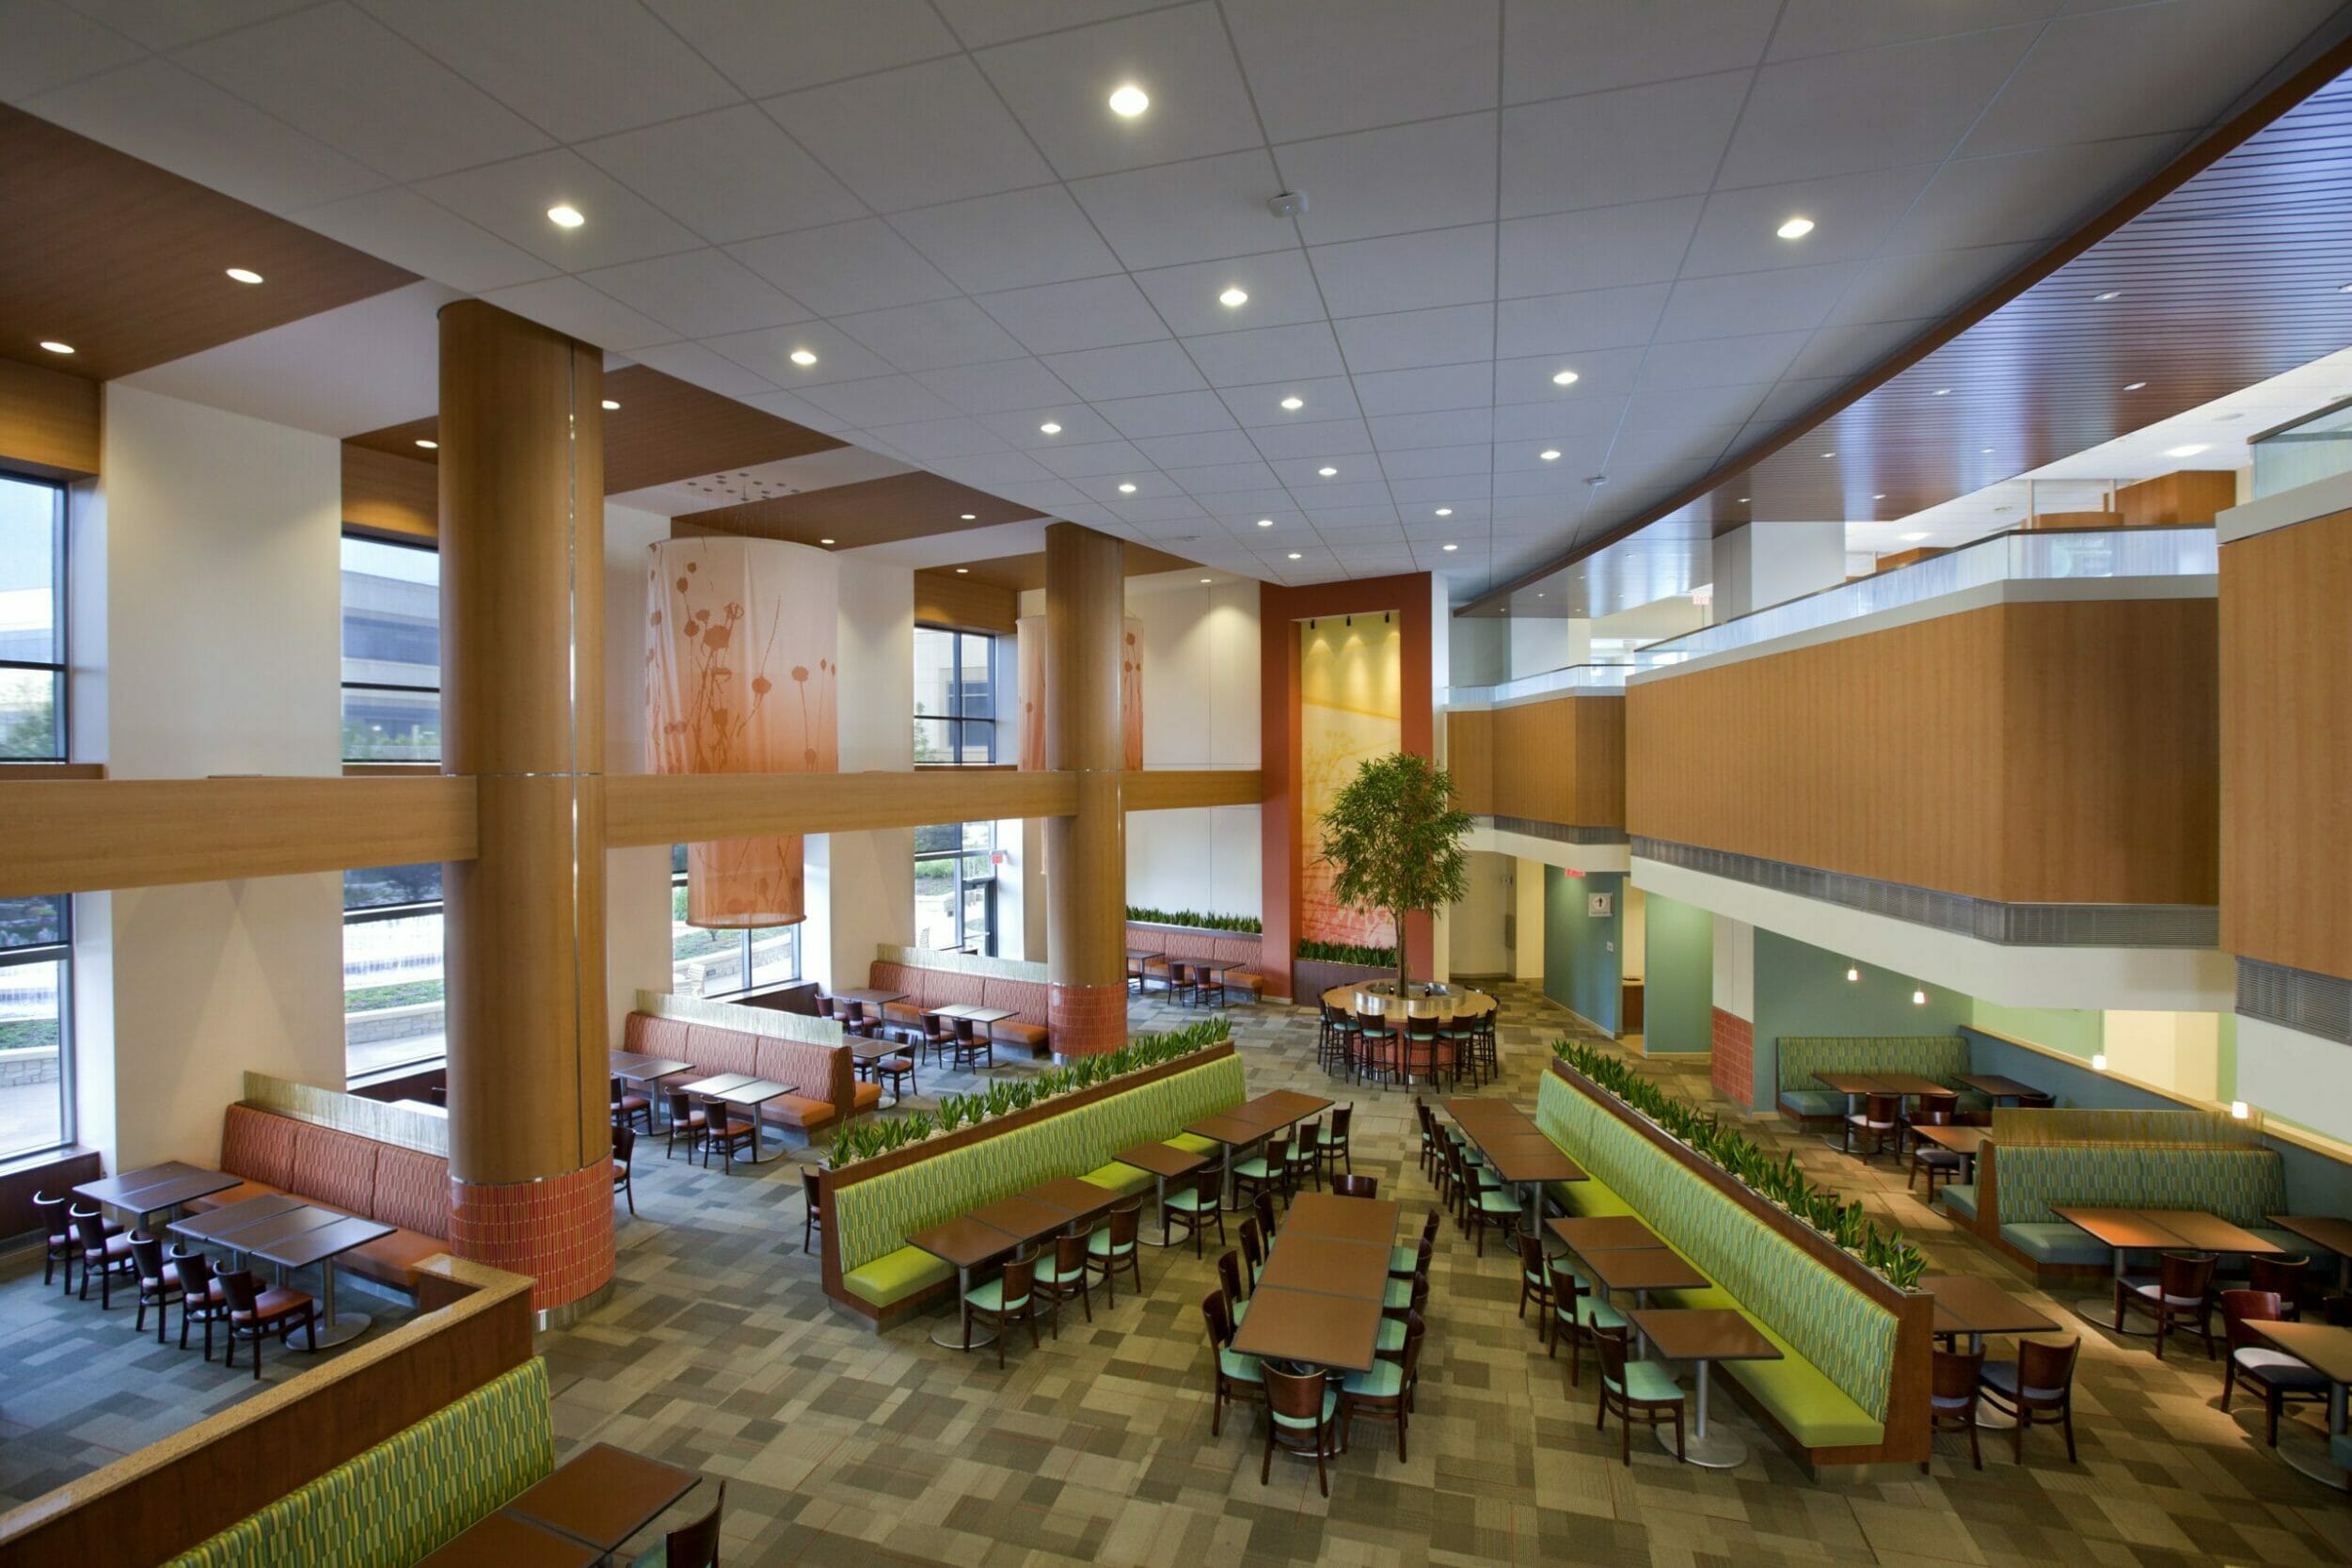 view of cafeteria from upper level. Plentiful seating, large columns, artistic fabric chandeliers, tree and plants